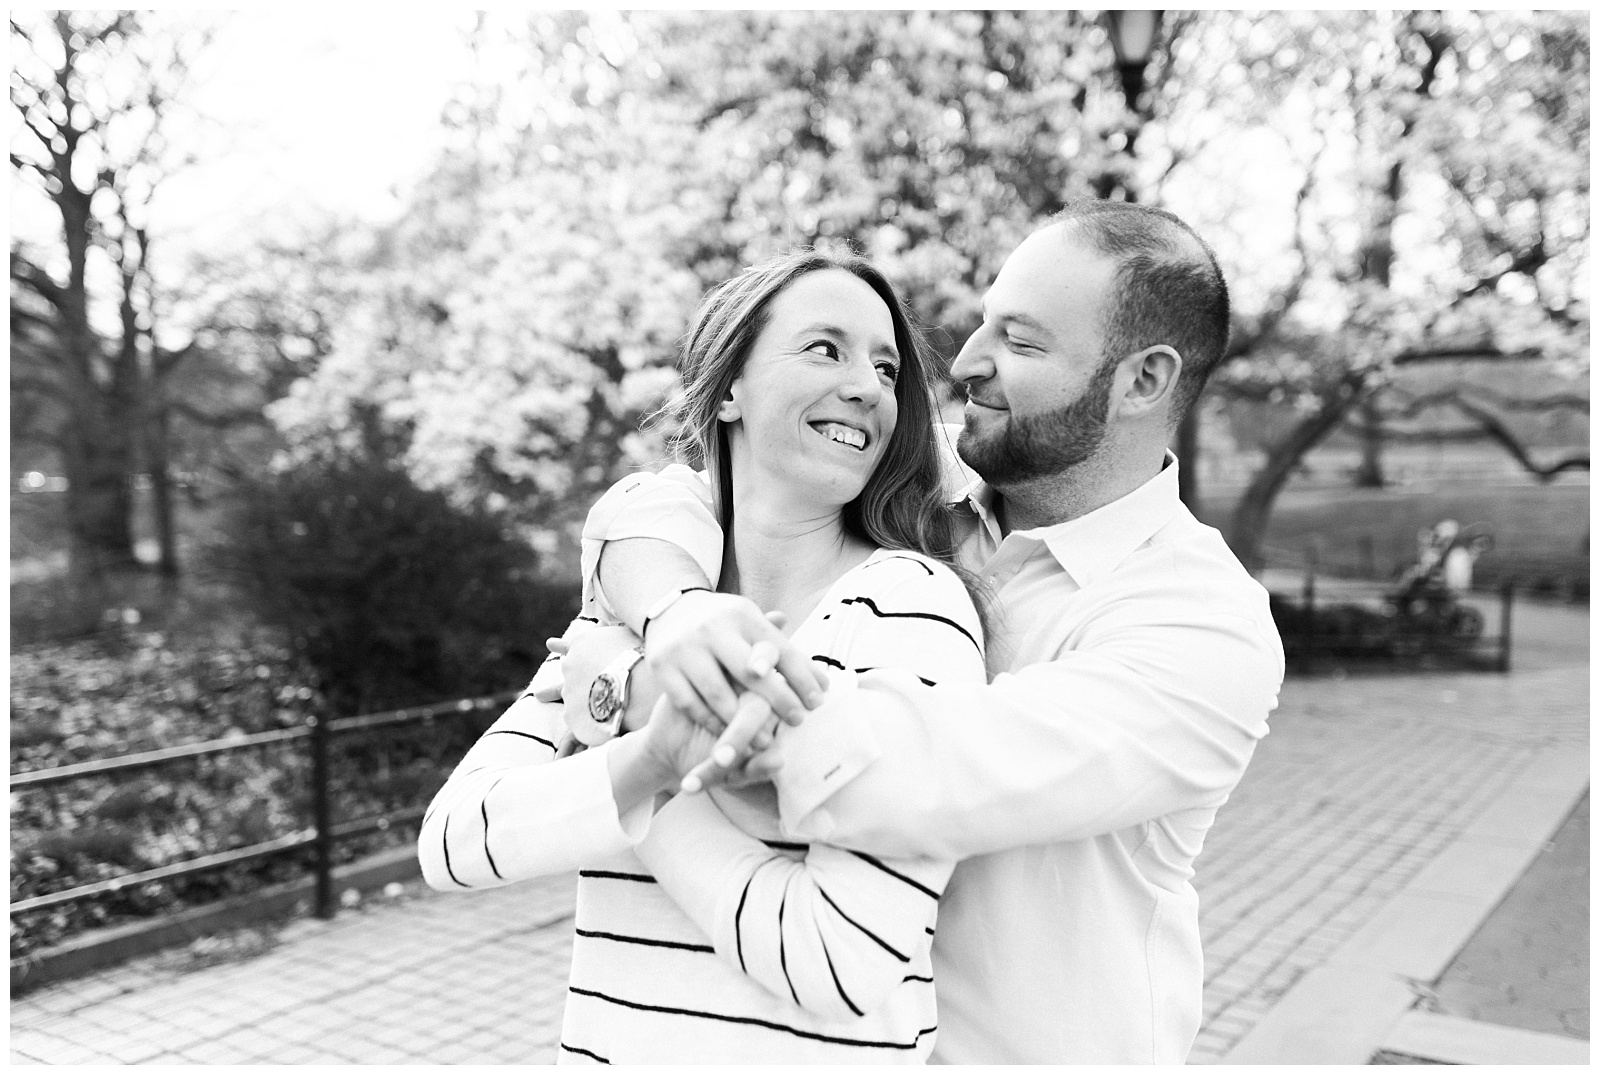 Central Park, NYC engagement session, springtime, wedding photographer, New York, black and white